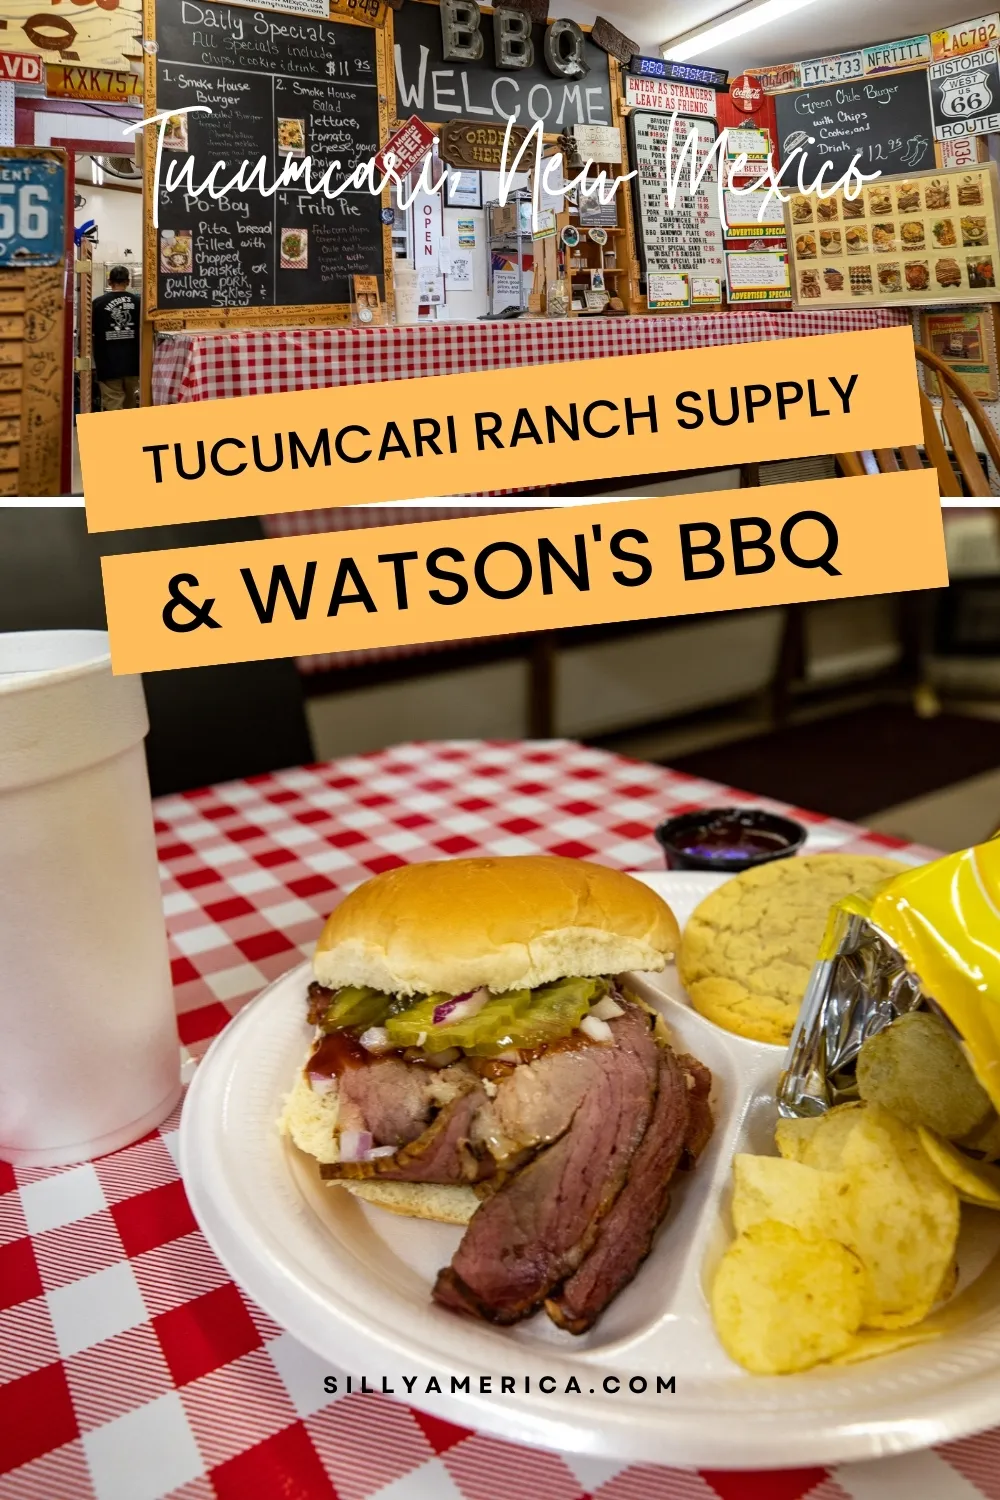 Tucumcari Ranch Supply & Watson’s BBQ in Tucumcari, New Mexico is an old-fashioned town and country store that’s home to the best barbecue in Tucumcari, if not the state. Tucumcari Ranch Supply opened at its current location in 1980. The souvenir shop, supply store, and museum is owned by Jimmy and Stella Watson who have operated the multi-functional business for more than 40 years. But, most Route 66 travelers come for the food. #ROute66 #Route66Restaurant #NewMexico #TucumcariNewMexico